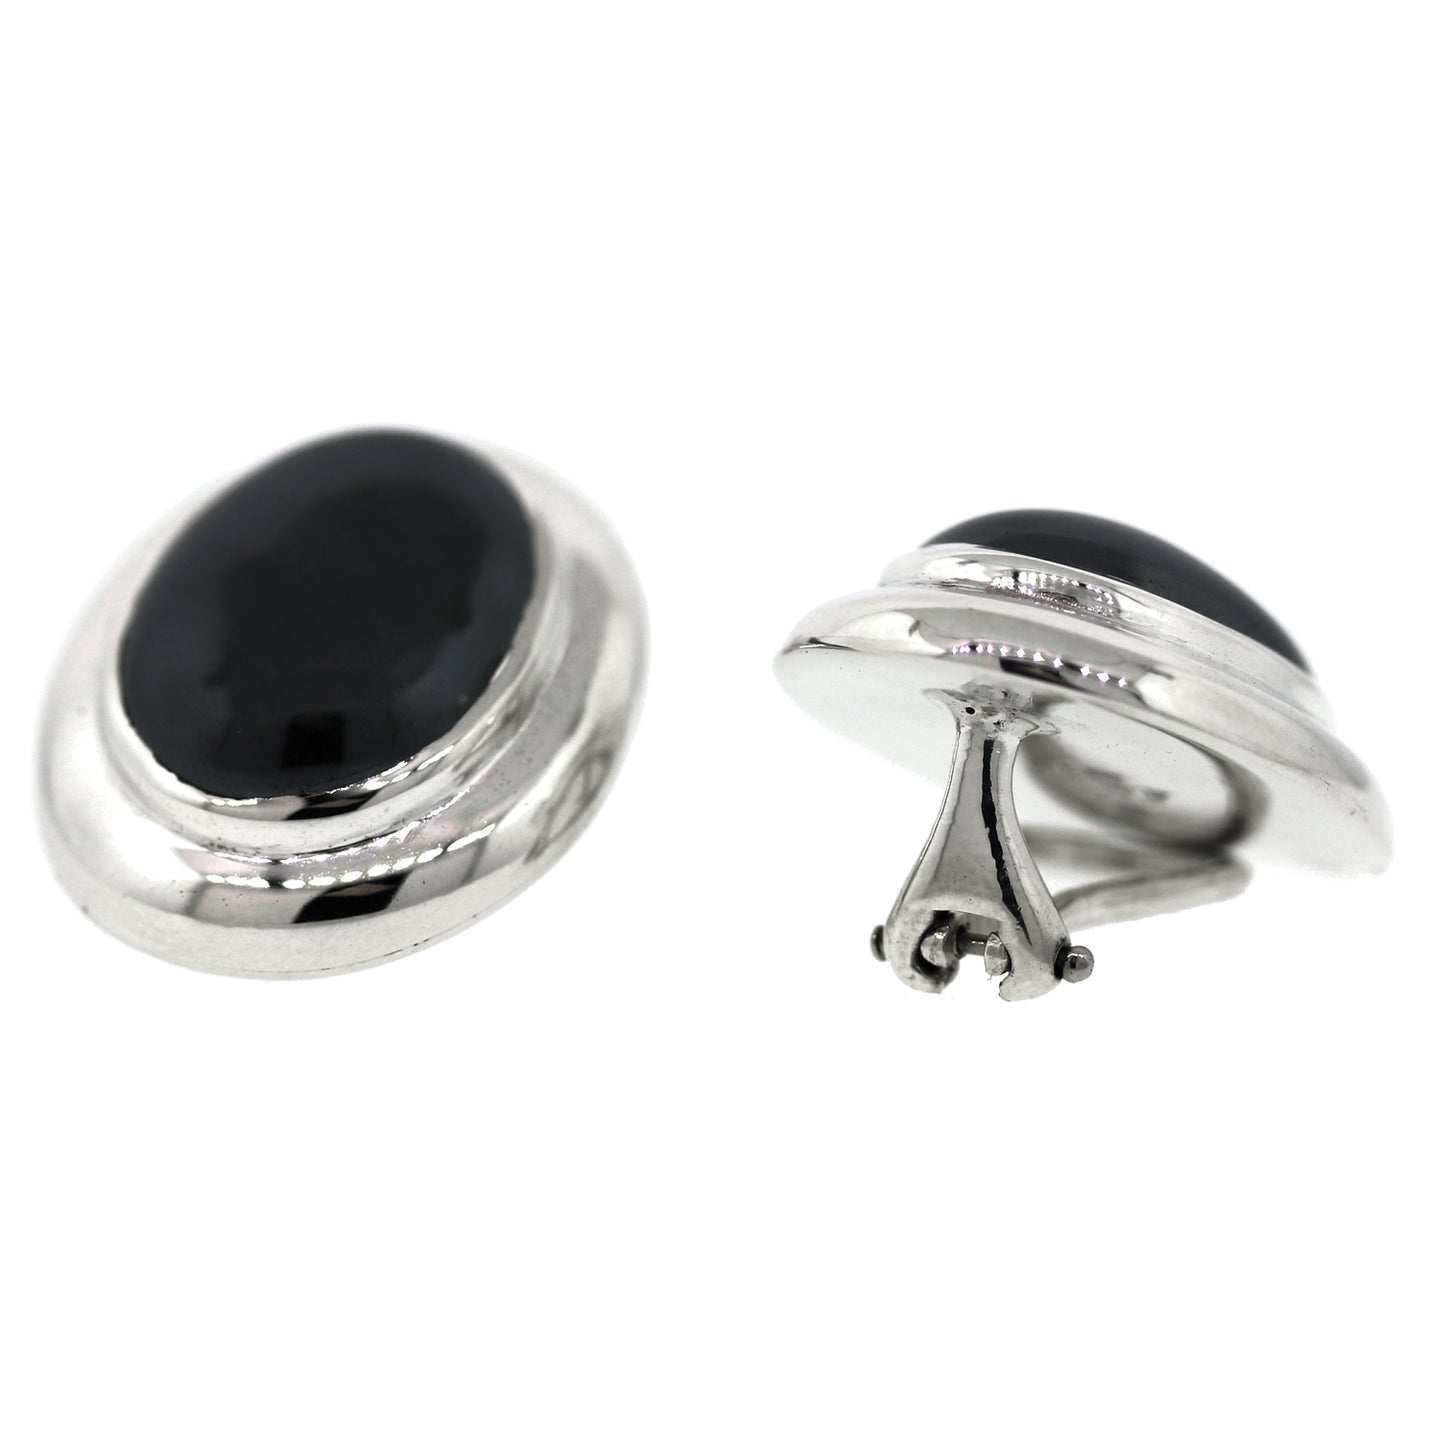 Tiffany and Co. Hematite Cabochon Clip-On Earrings in Sterling Silver